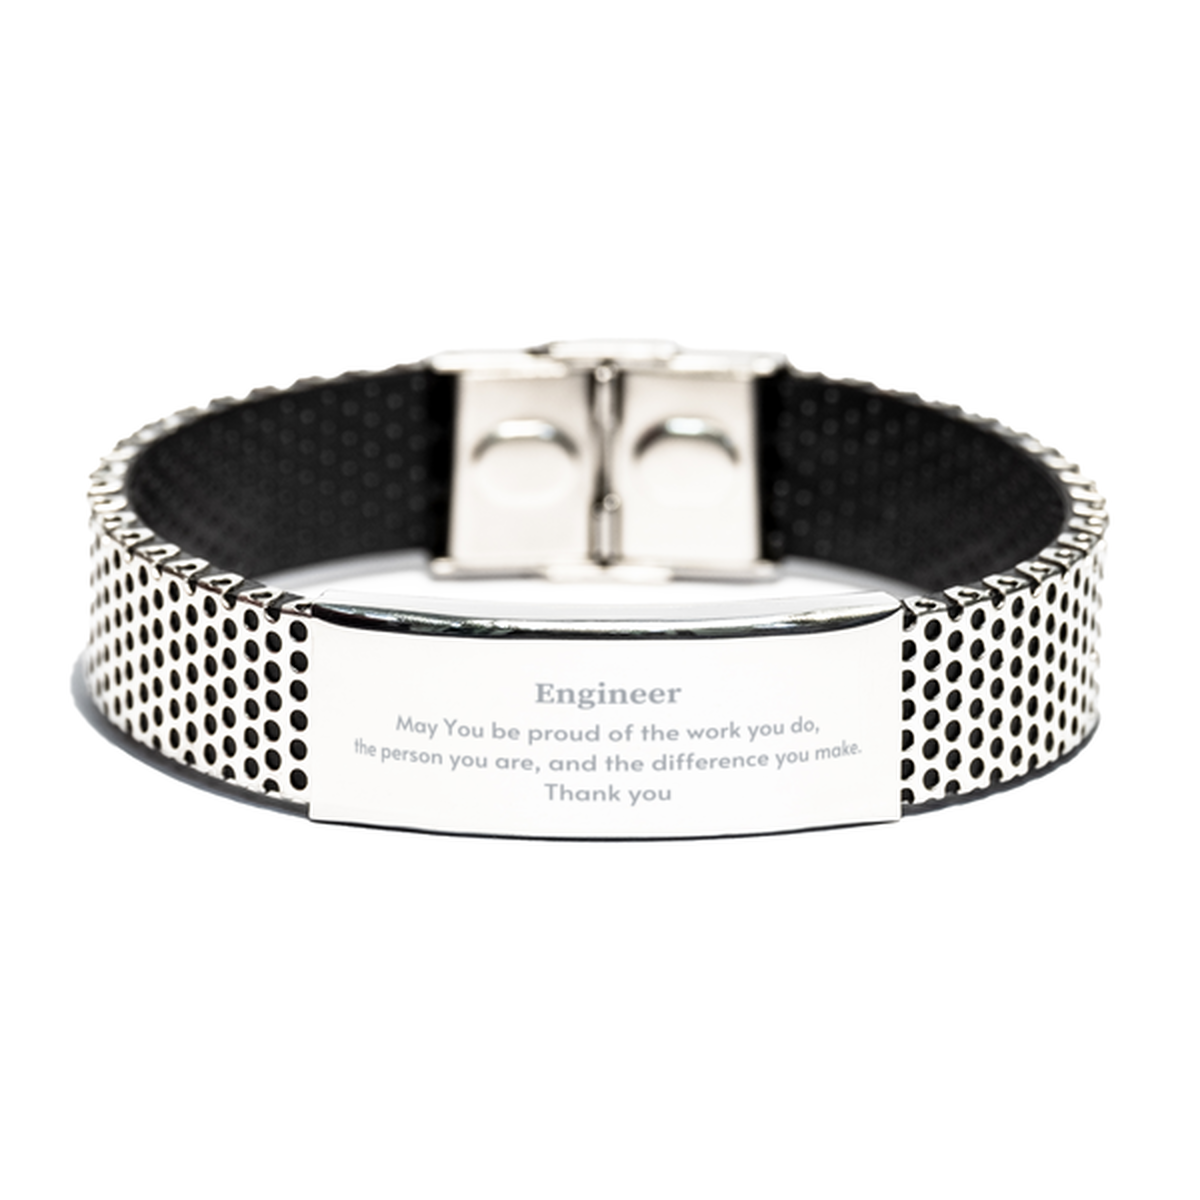 Heartwarming Stainless Steel Bracelet Retirement Coworkers Gifts for Engineer, Engineer May You be proud of the work you do, the person you are Gifts for Boss Men Women Friends